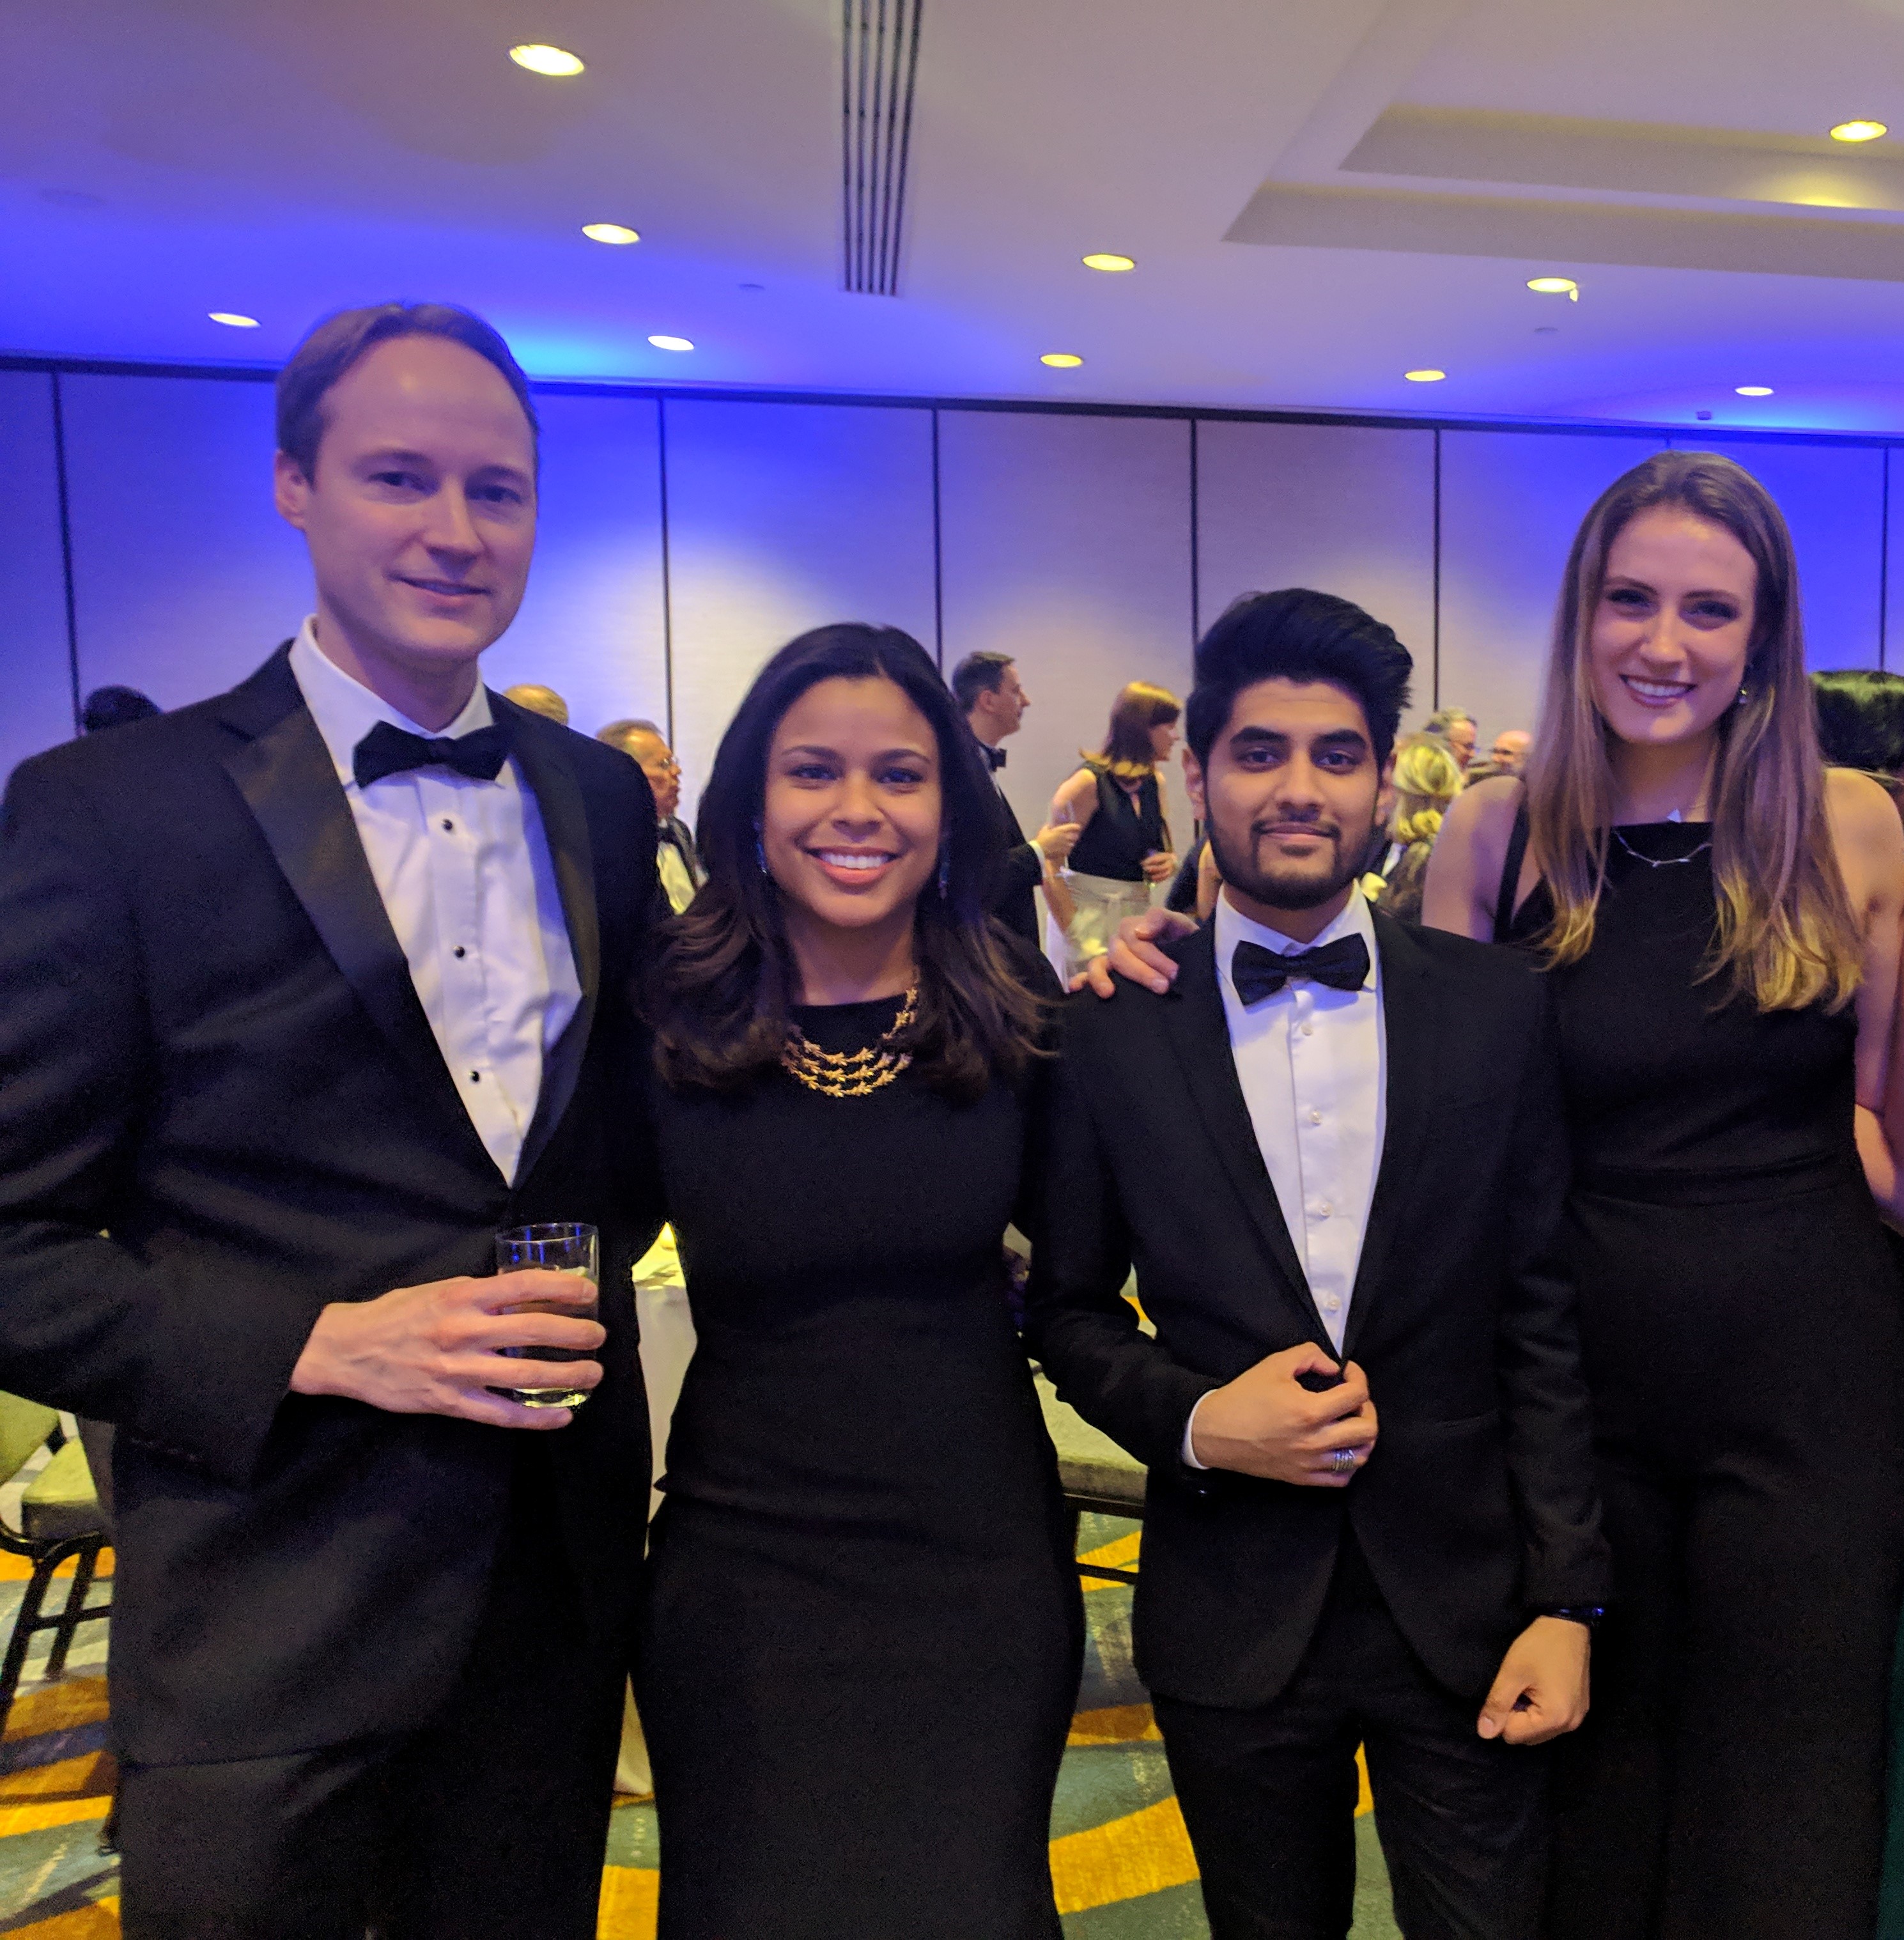 Haley Guiliano Joins 3,000 Others at the NYIPLA Judges’ Dinner